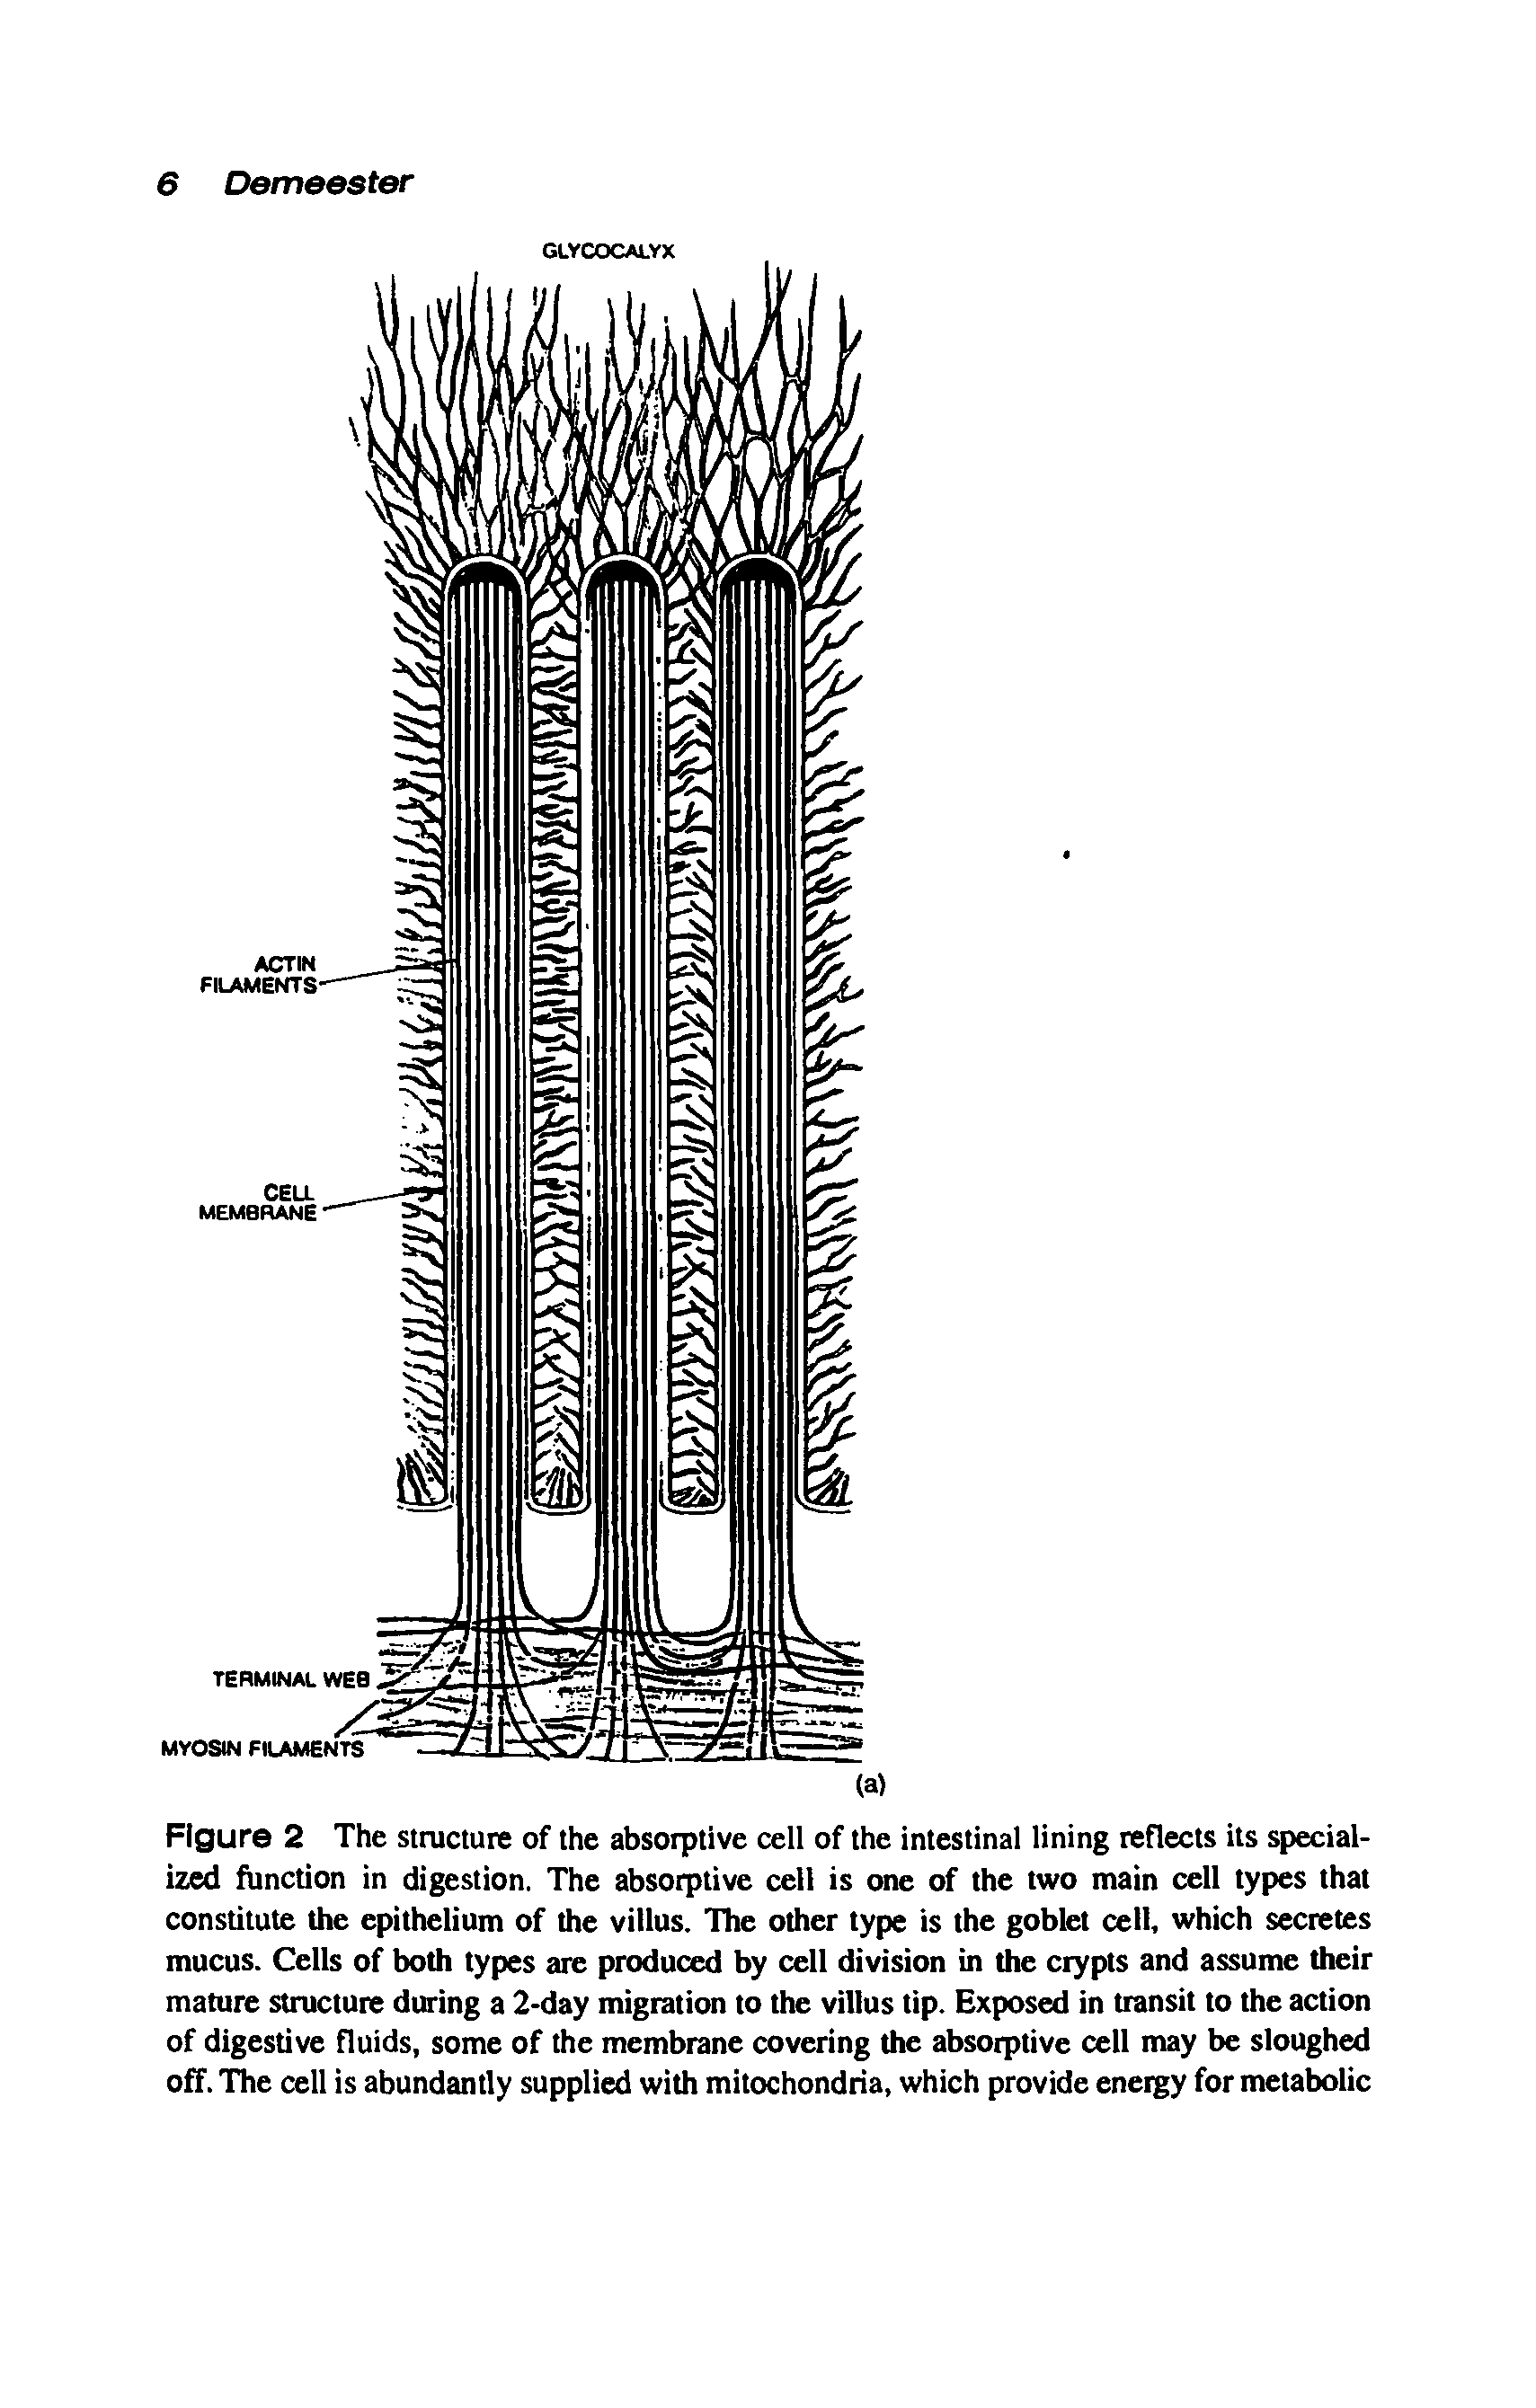 Figure 2 The structure of the absorptive cell of the intestinal lining reflects its specialized function in digestion. The absorptive cell is one of the two main cell types that constitute the epithelium of the villus. The other type is the goblet cell, which secretes mucus. Cells of both types are produced by cell division in the crypts and assume their mature structure during a 2-day migration to the villus tip. Exposed in transit to the action of digestive fluids, some of the membrane covering the absorptive cell may be sloughed off. The cell is abundantly supplied with mitochondria, which provide energy for metabolic...